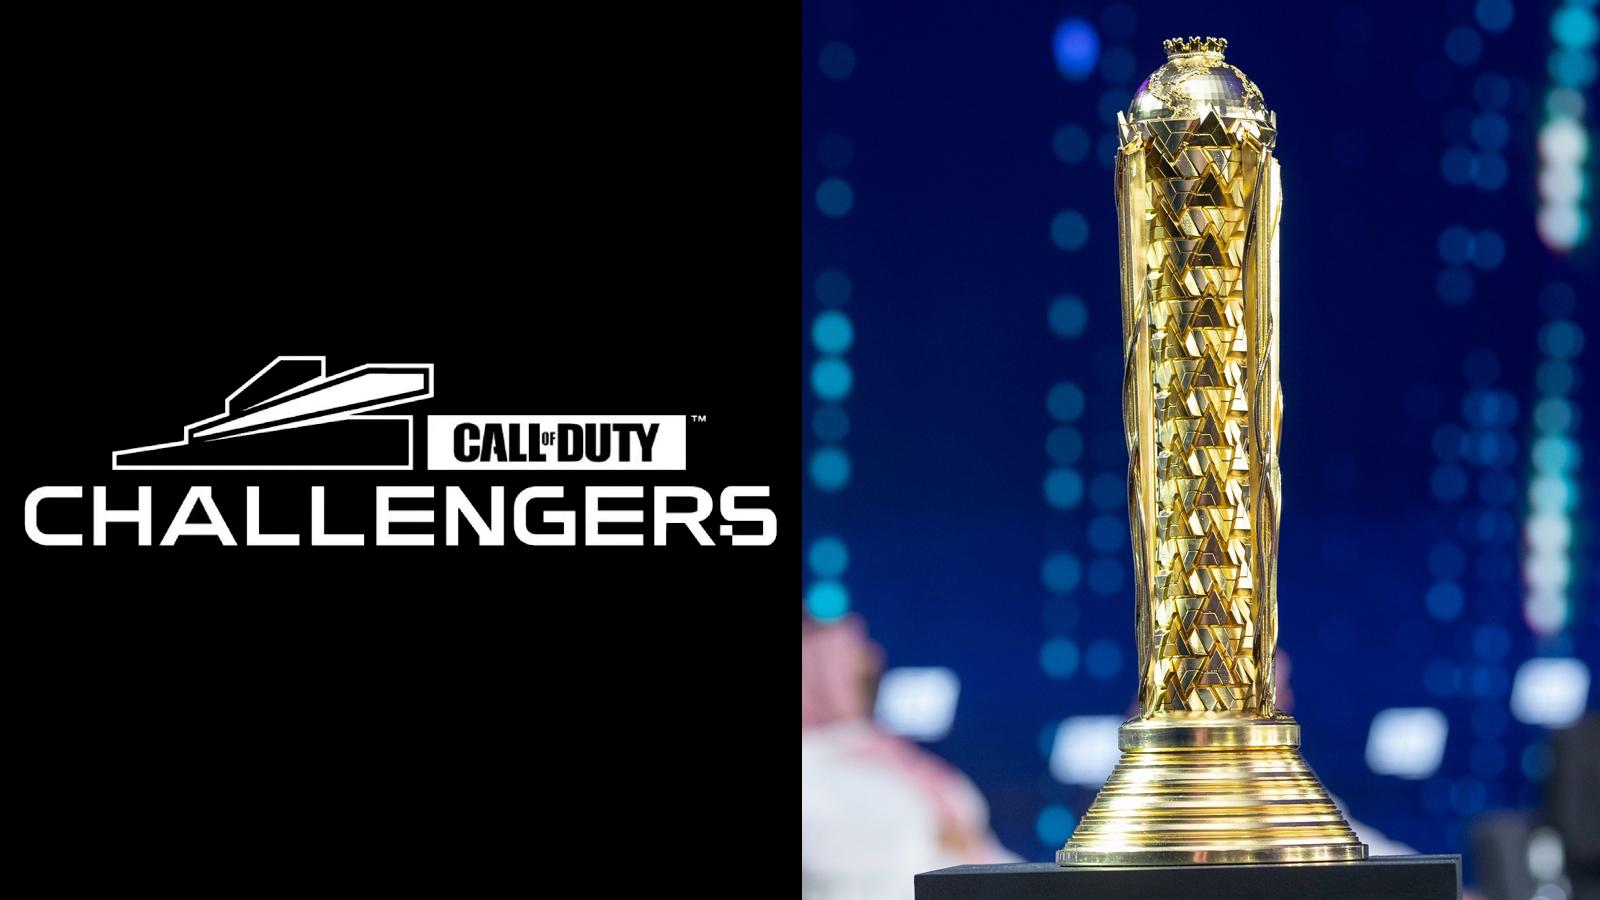 Side by side image of Call of Duty Challengers logo and the Esports World Cup trophy